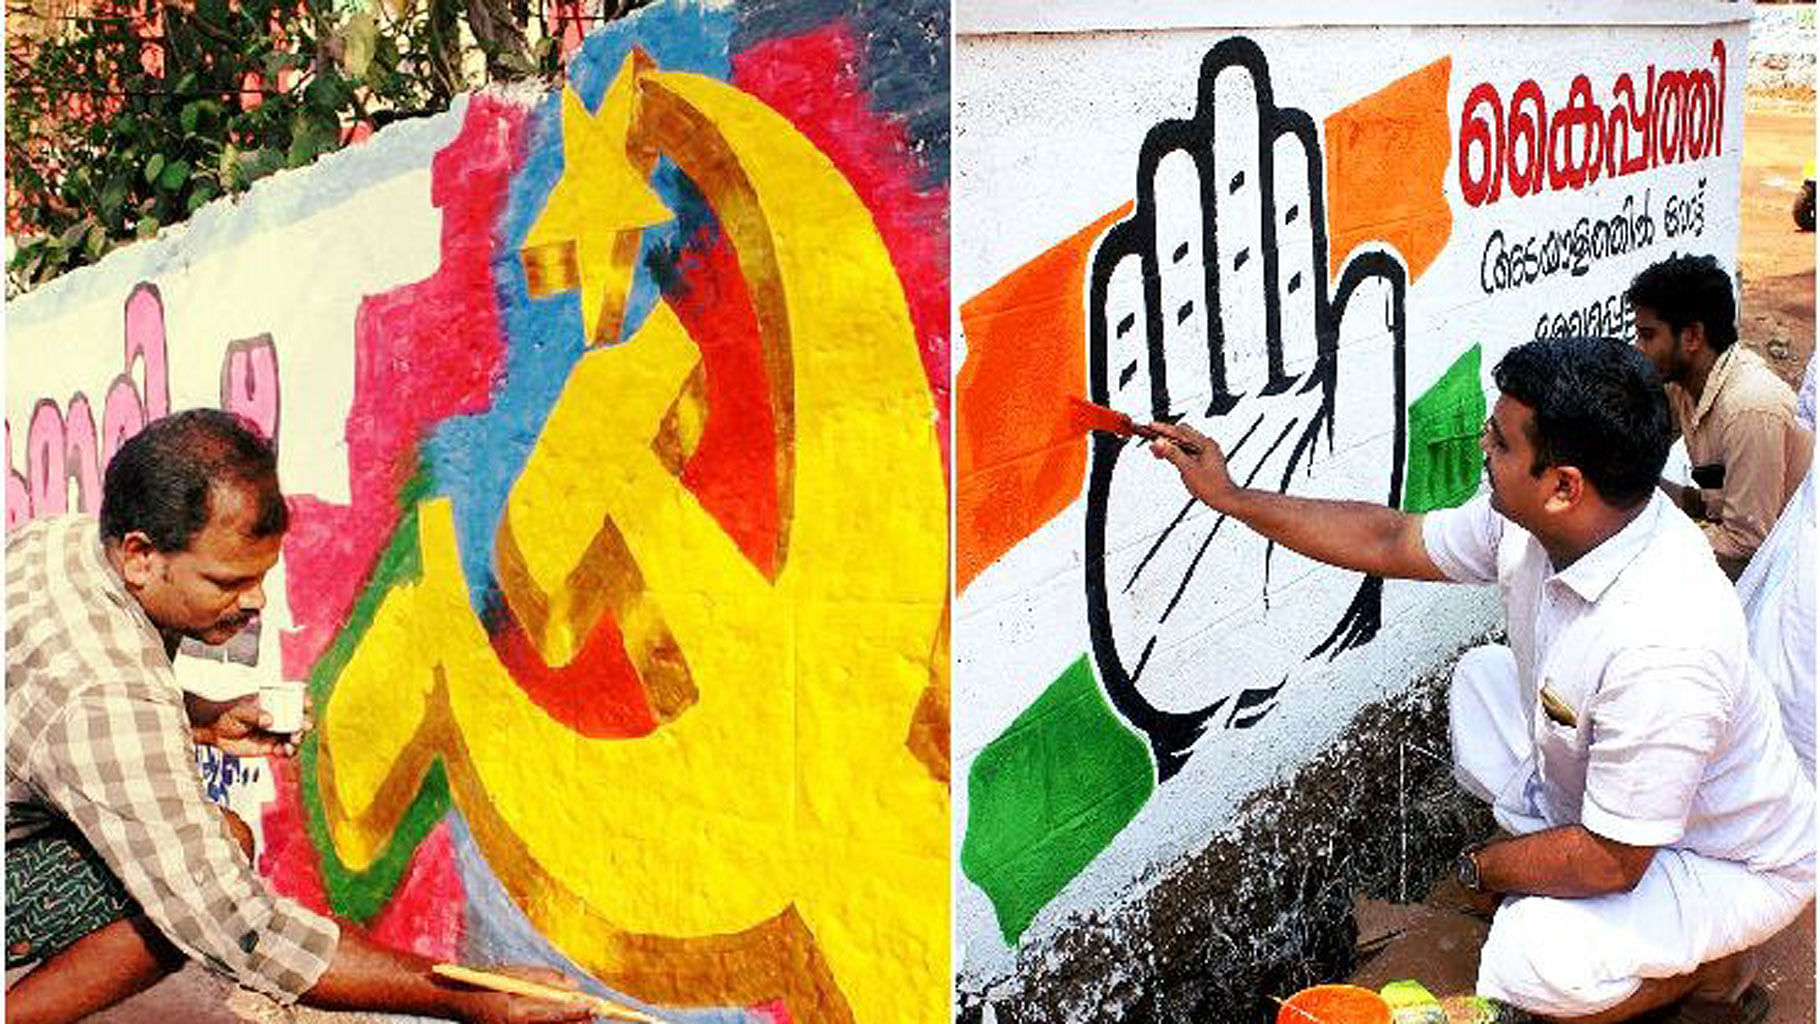 Symbols of CPI and COngress being painted on walls. (Photo: The News Minute)